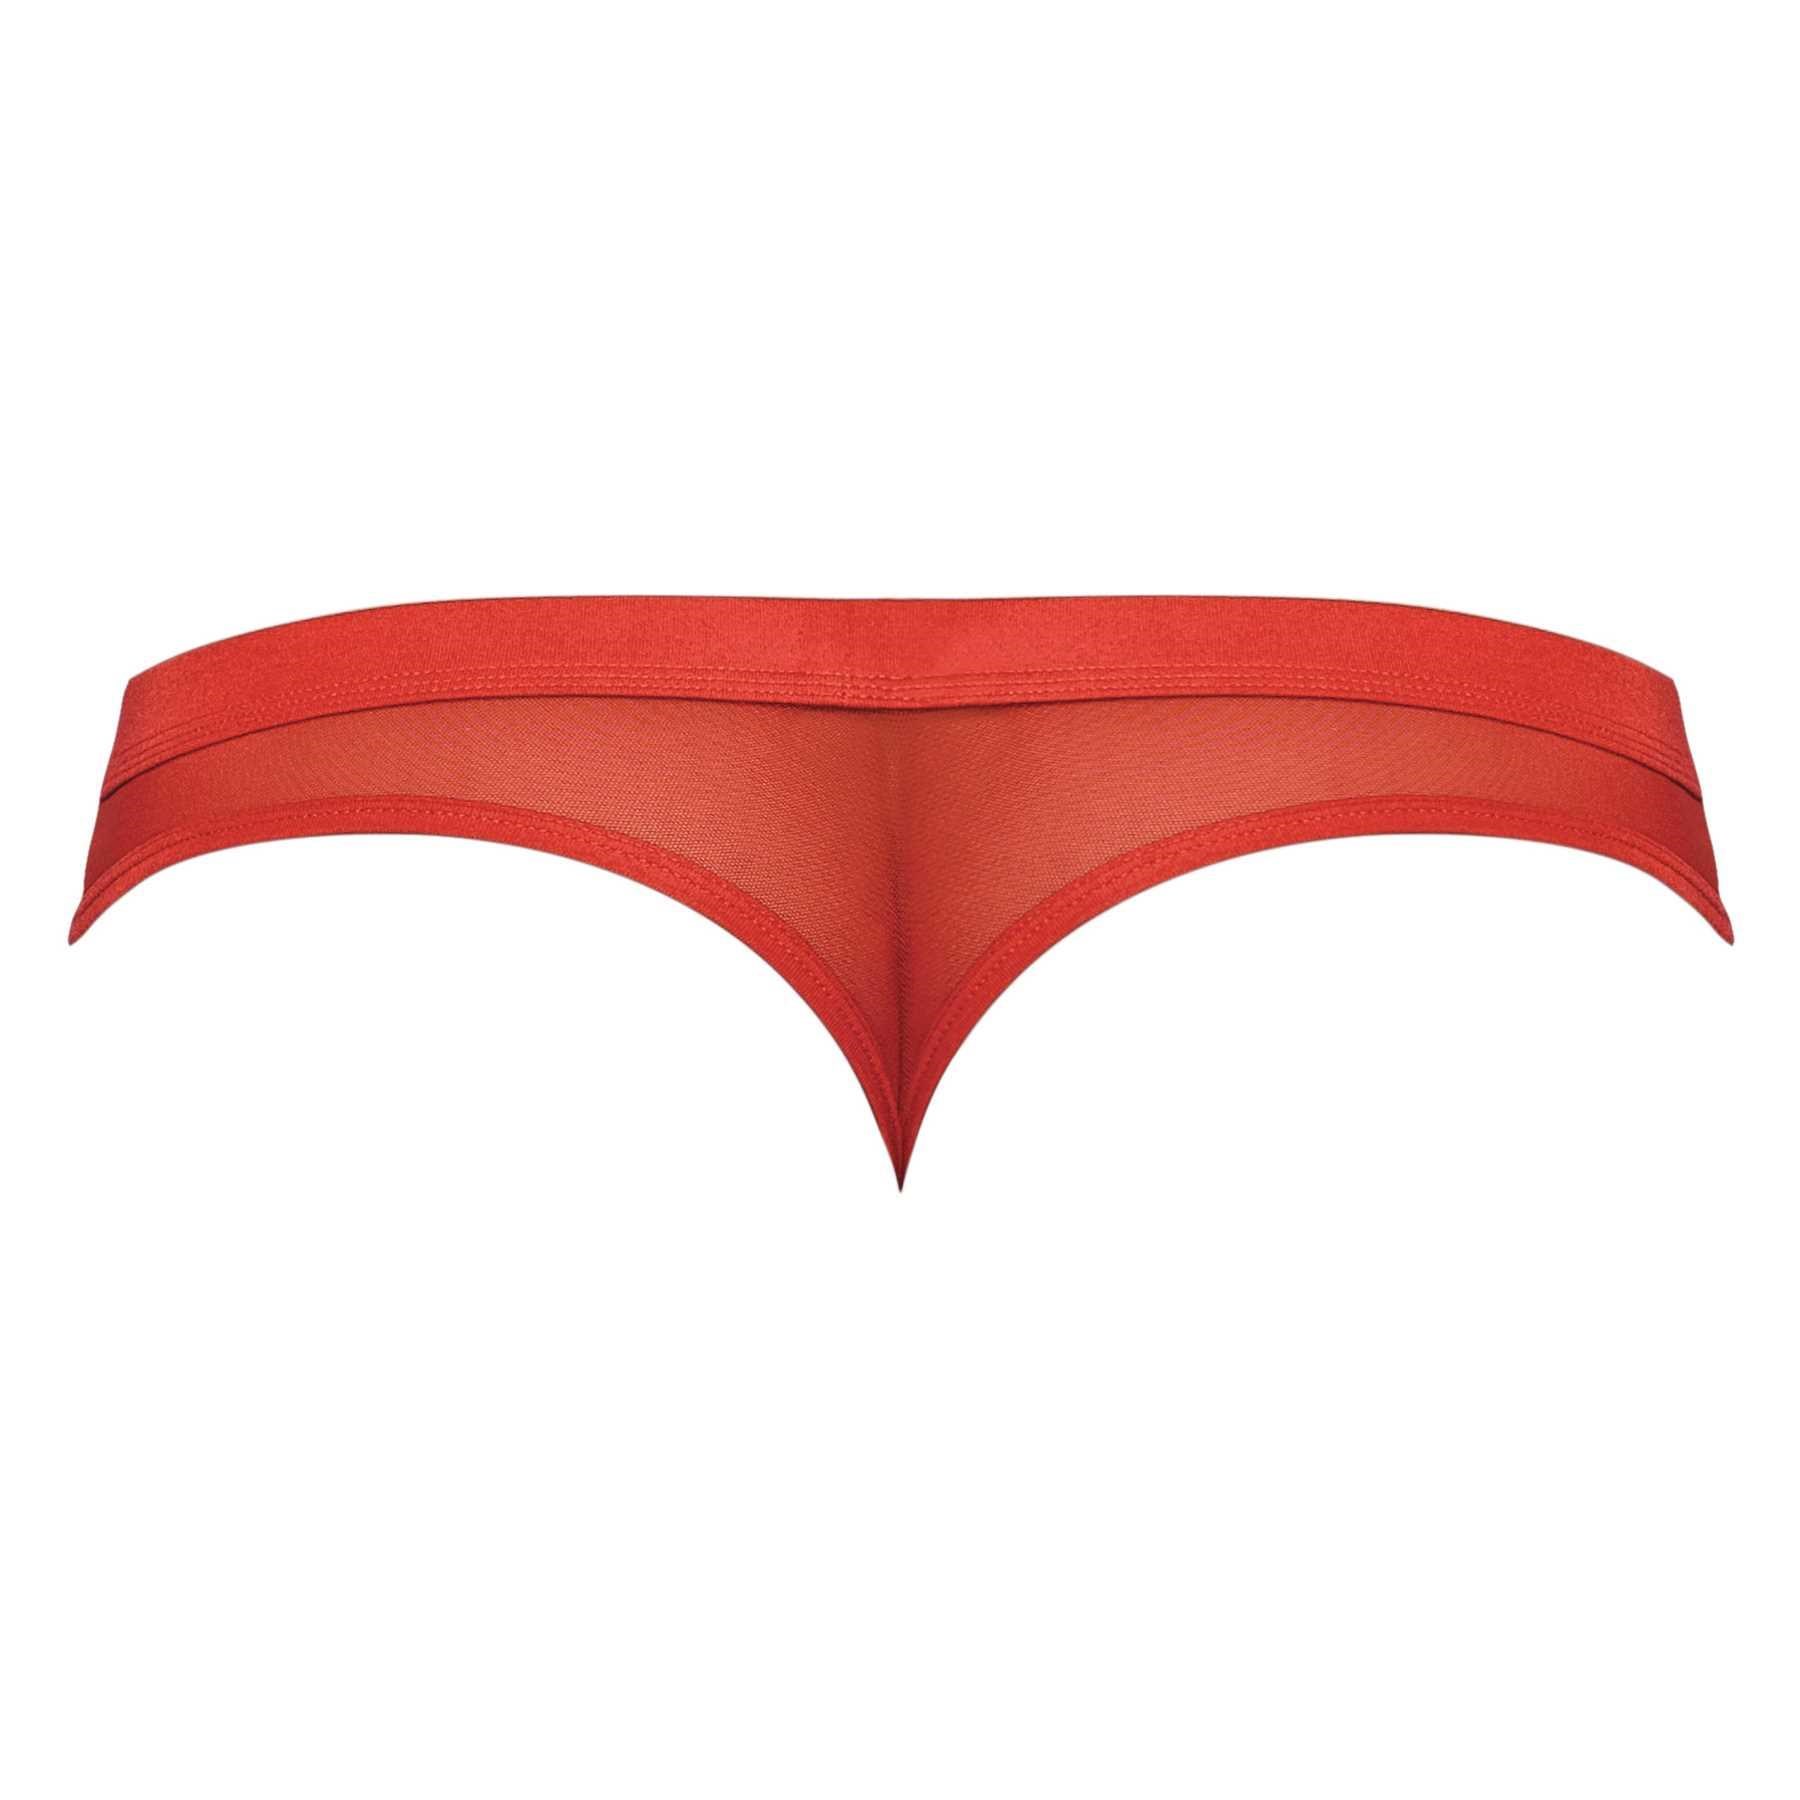 Hose Thong Red ghost back